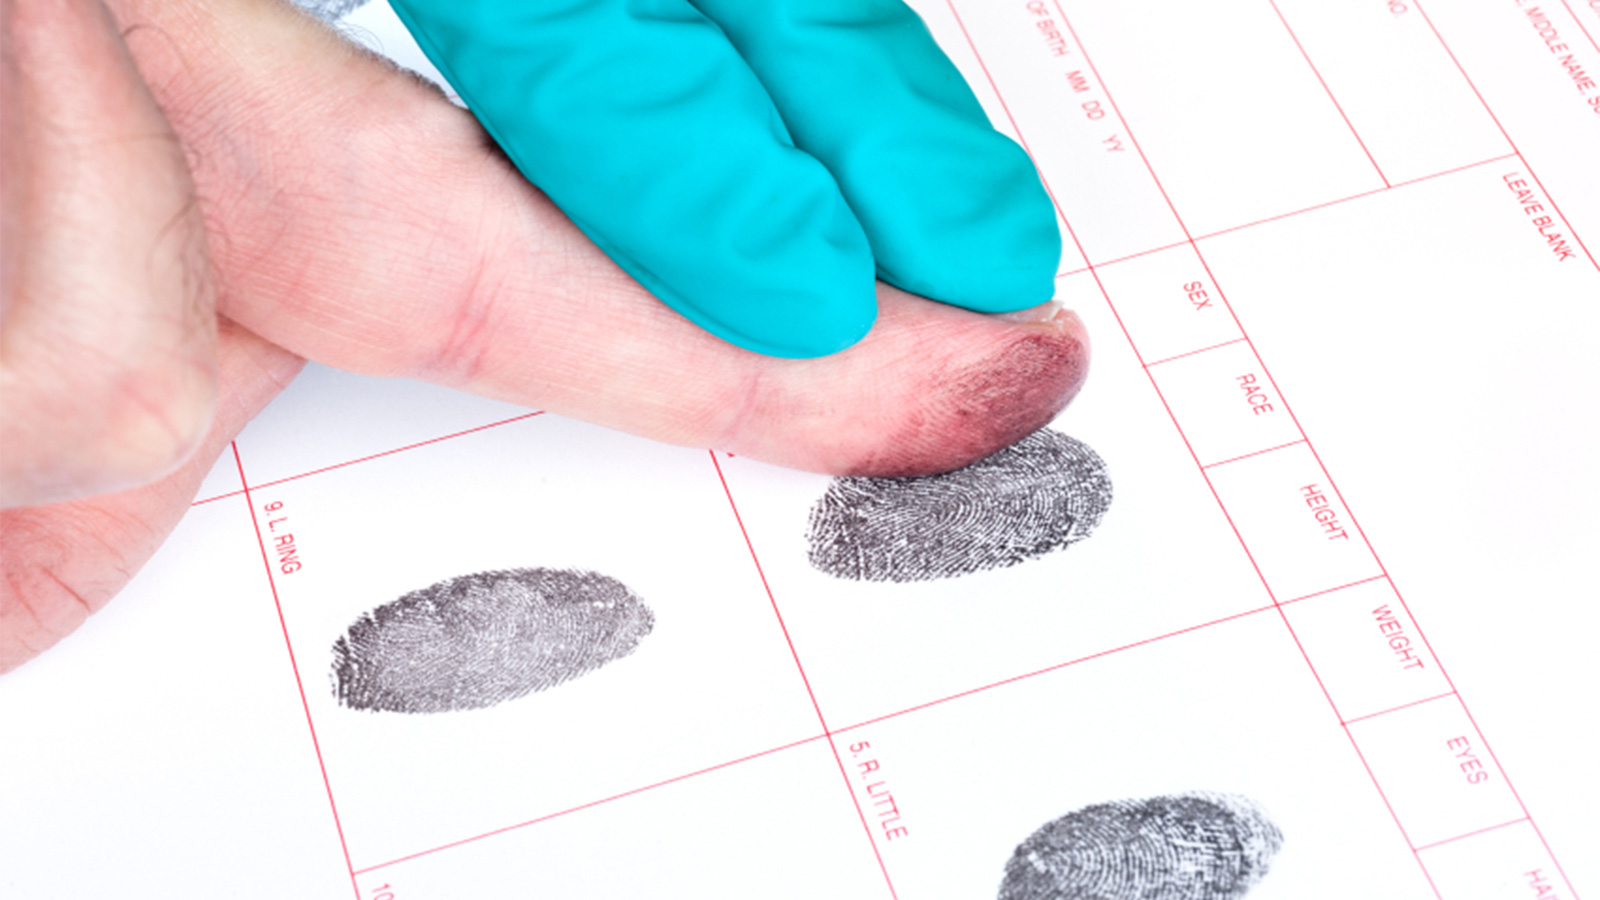 7 Key Steps for Effective Fingerprint-Based Background Screening - XuzPost » Tadalive - The Social Media Platform that respects the First Amendment - Ecommerce - Shopping - Freedom - Sign Up